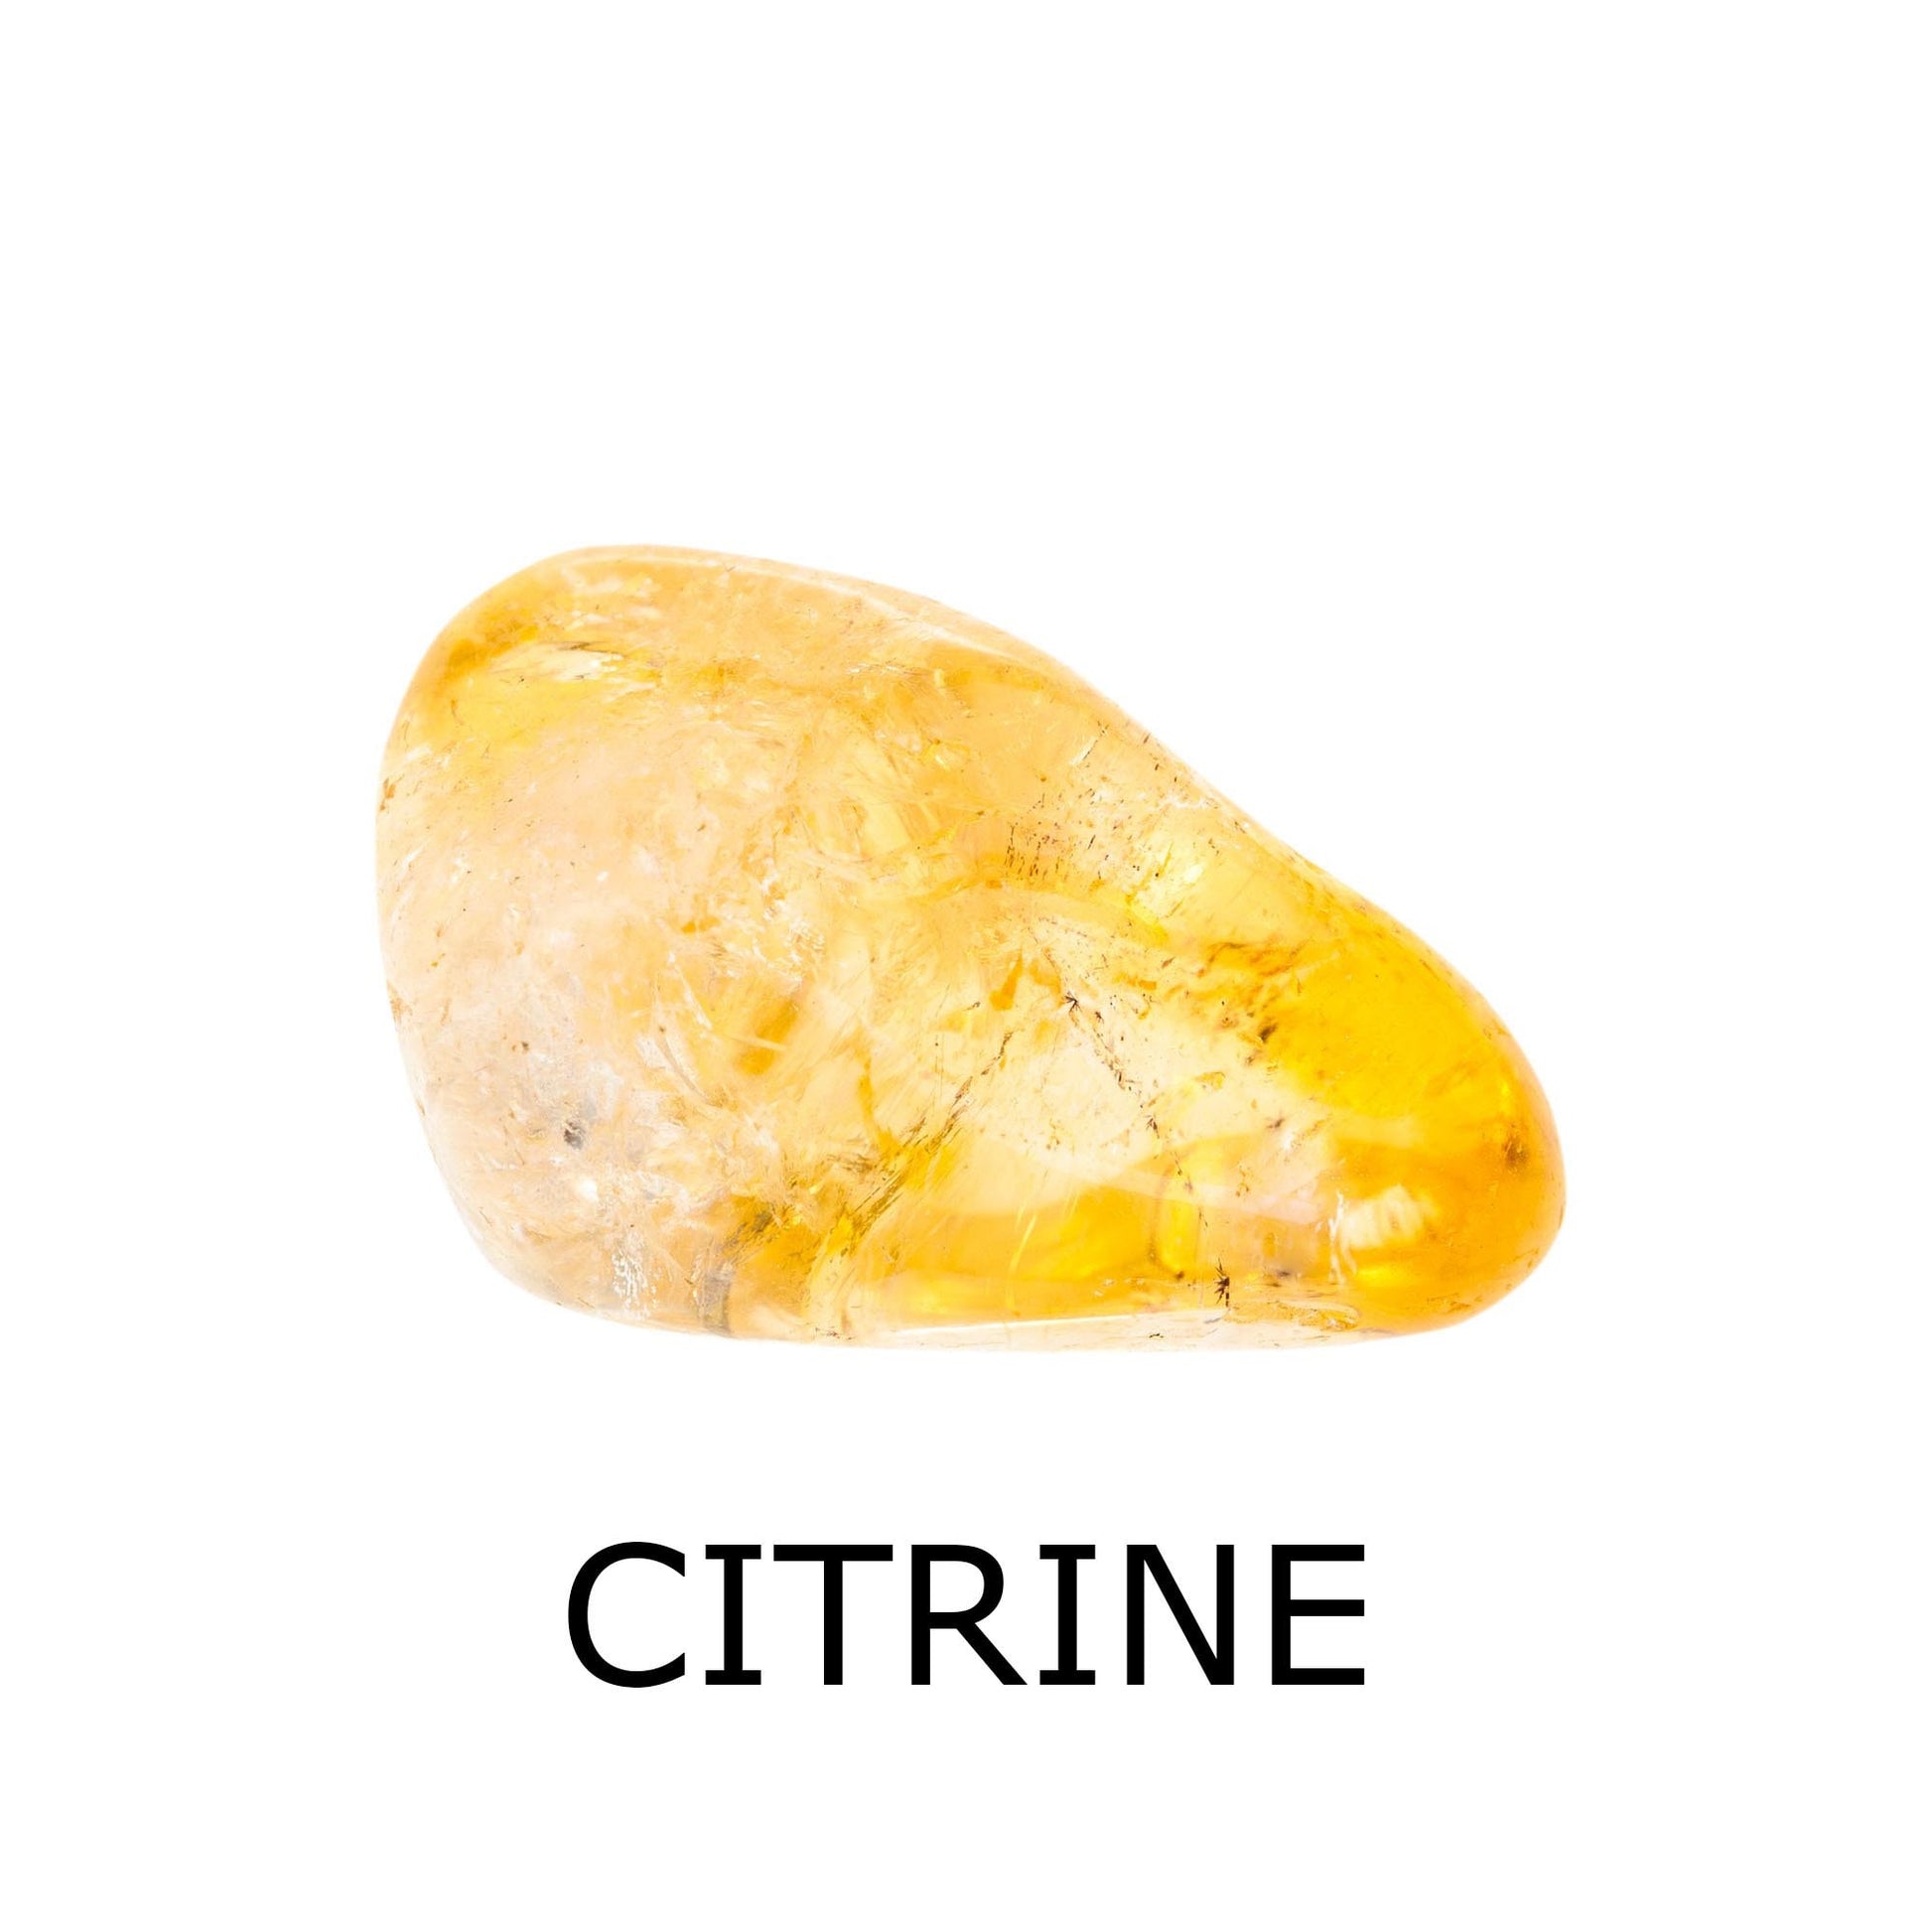 citrine crystal to promote self confidence and courage